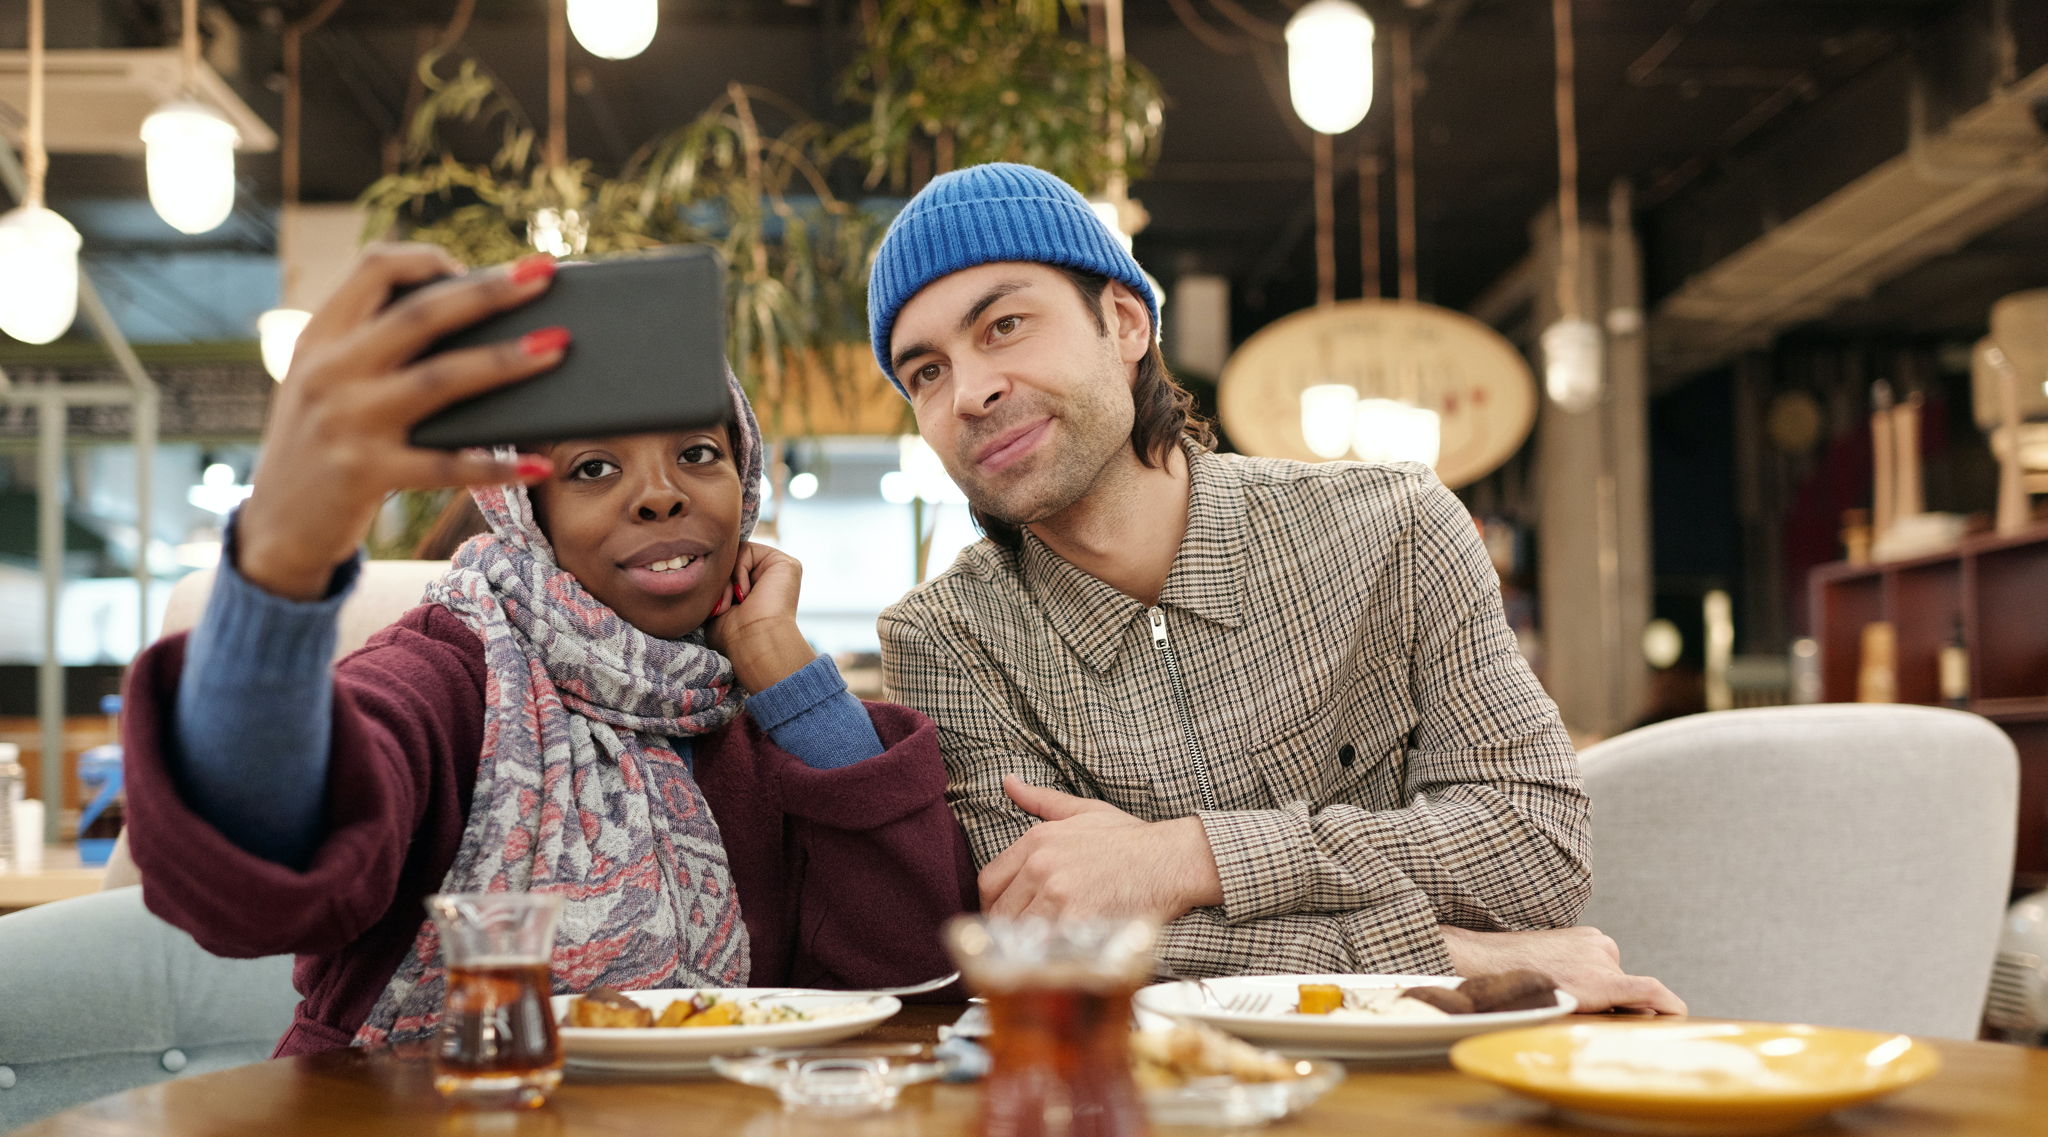 A woman wearing a head scarf and a hipster guy take a selfie together while they eat breakfast at a diner.